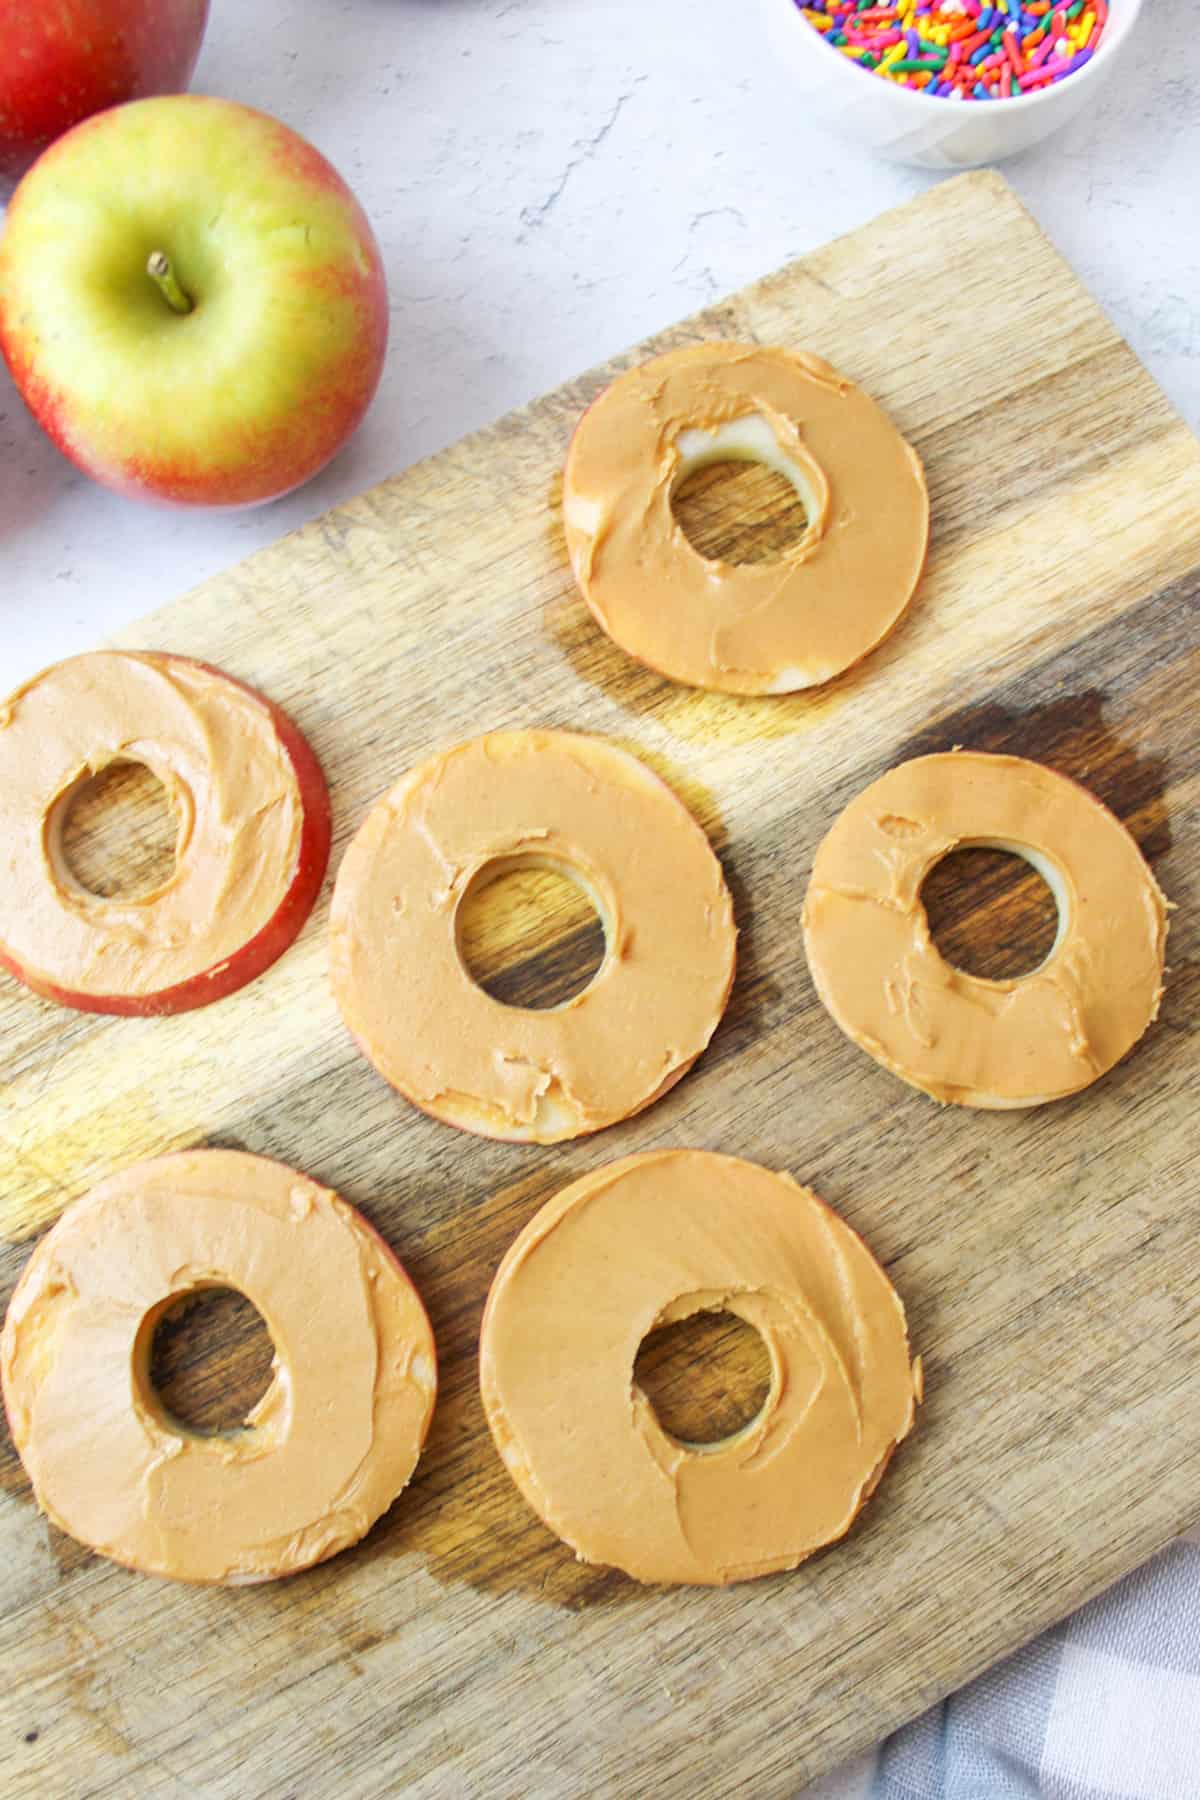 apple rounds smothered in peanut butter on a wooden cutting board.